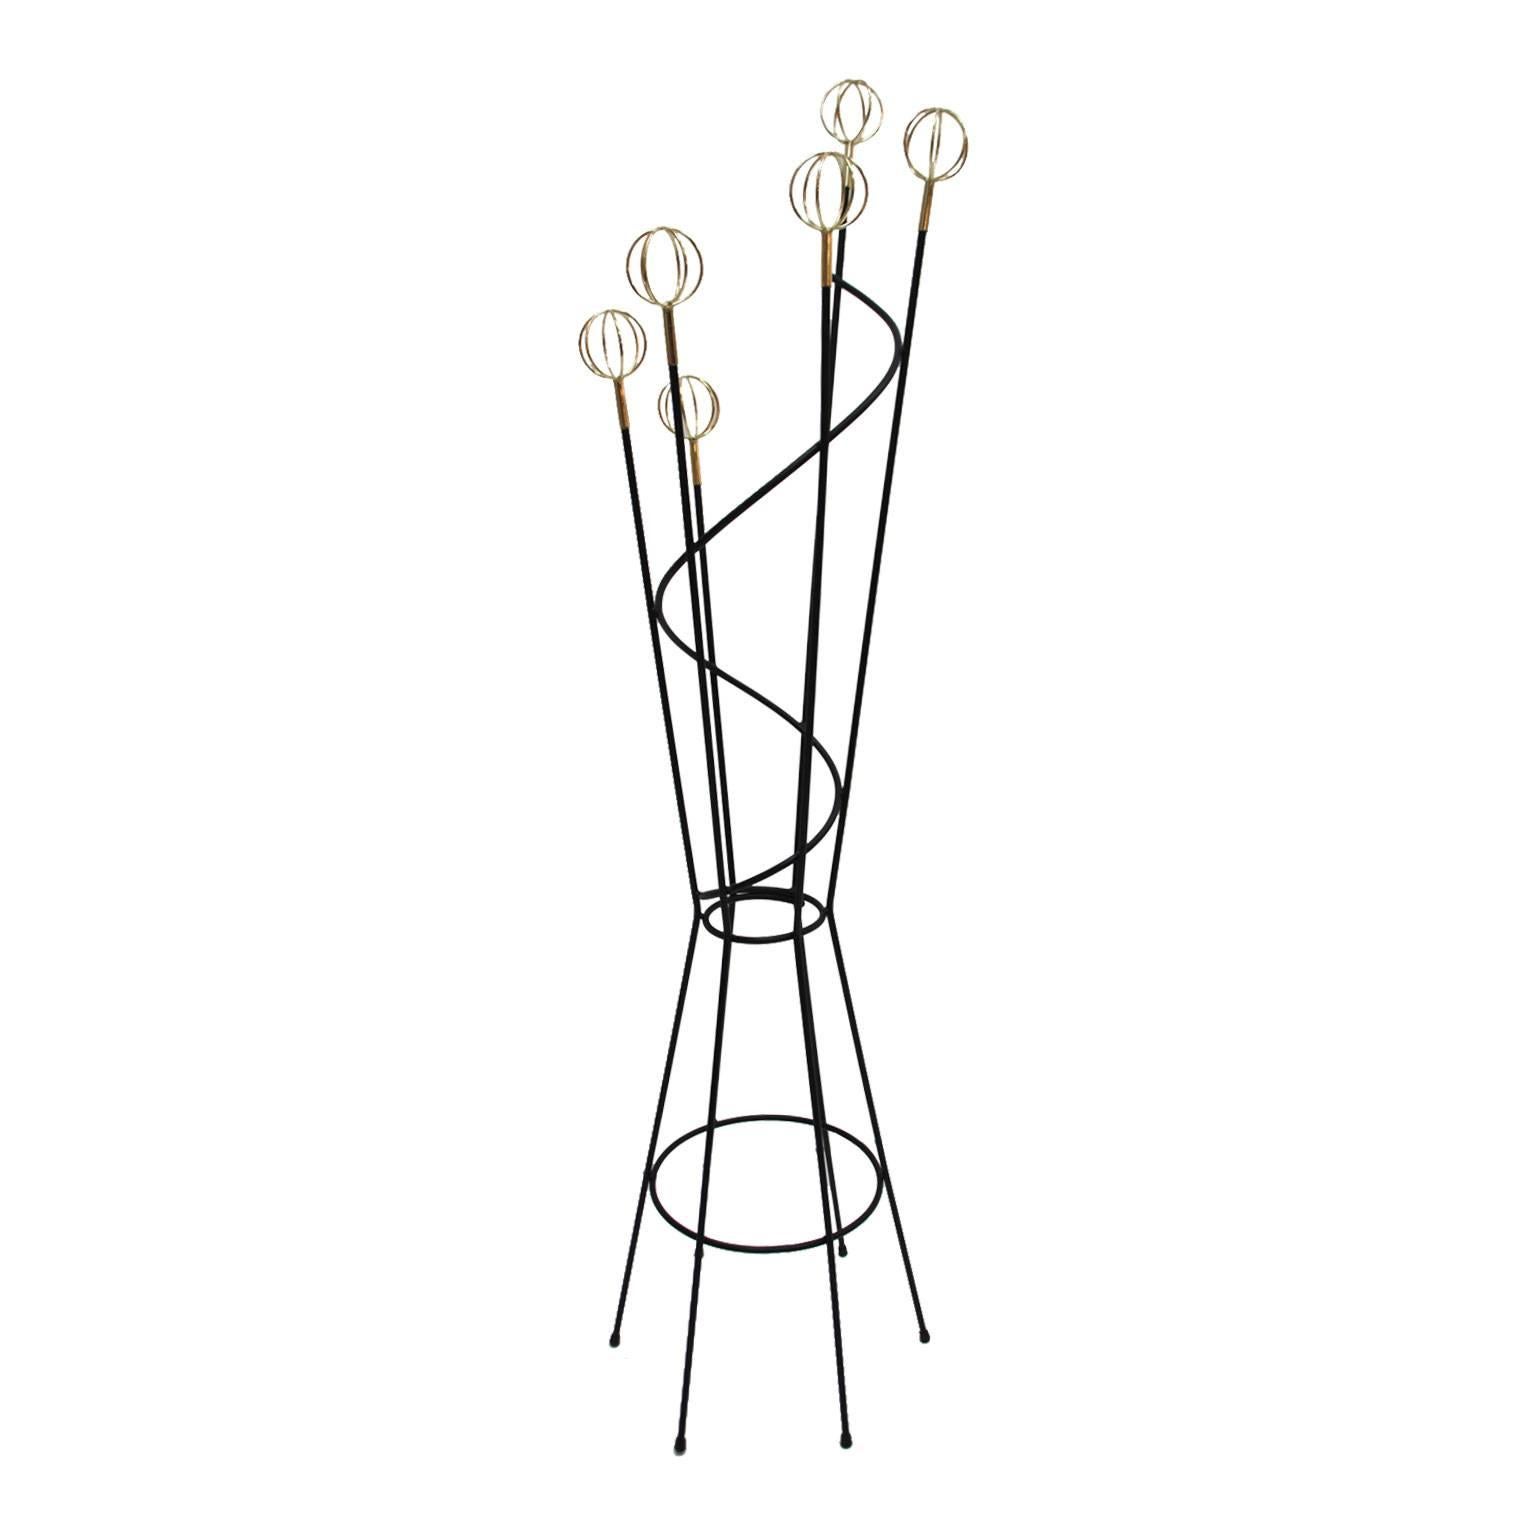 Coat stand designed by Roger Ferraud and edited by Geo, composed of six arms made in black lacquered iron finished in brass sphere, France, 1950.